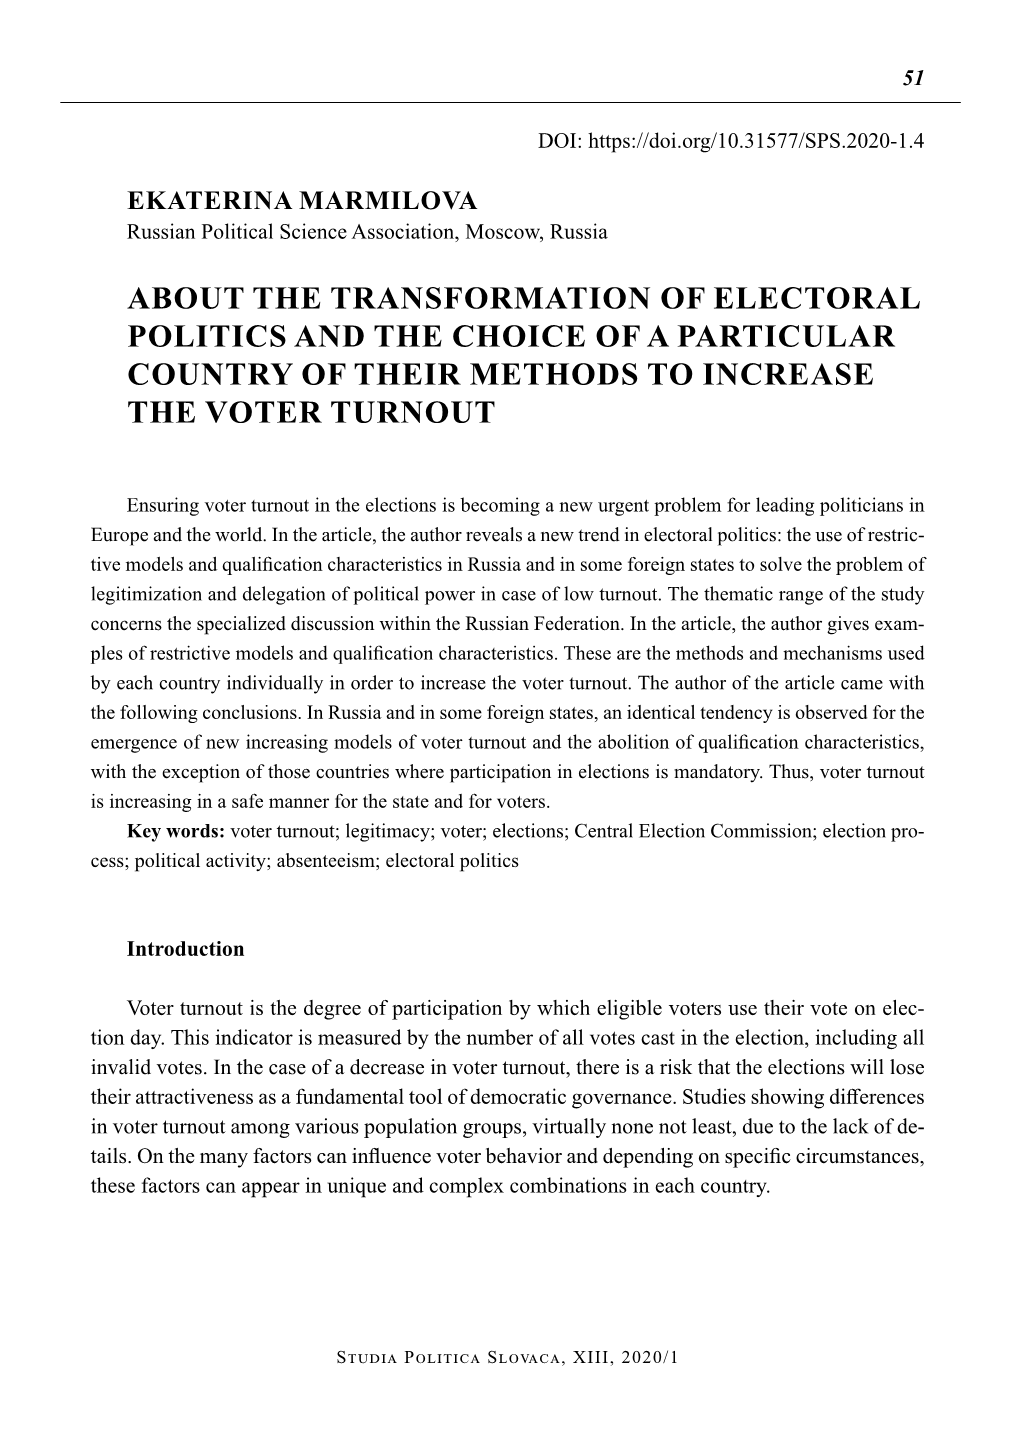 About the Transformation of Electoral Politics and the Choice of a Particular Country of Their Methods to Increase the Voter Turnout